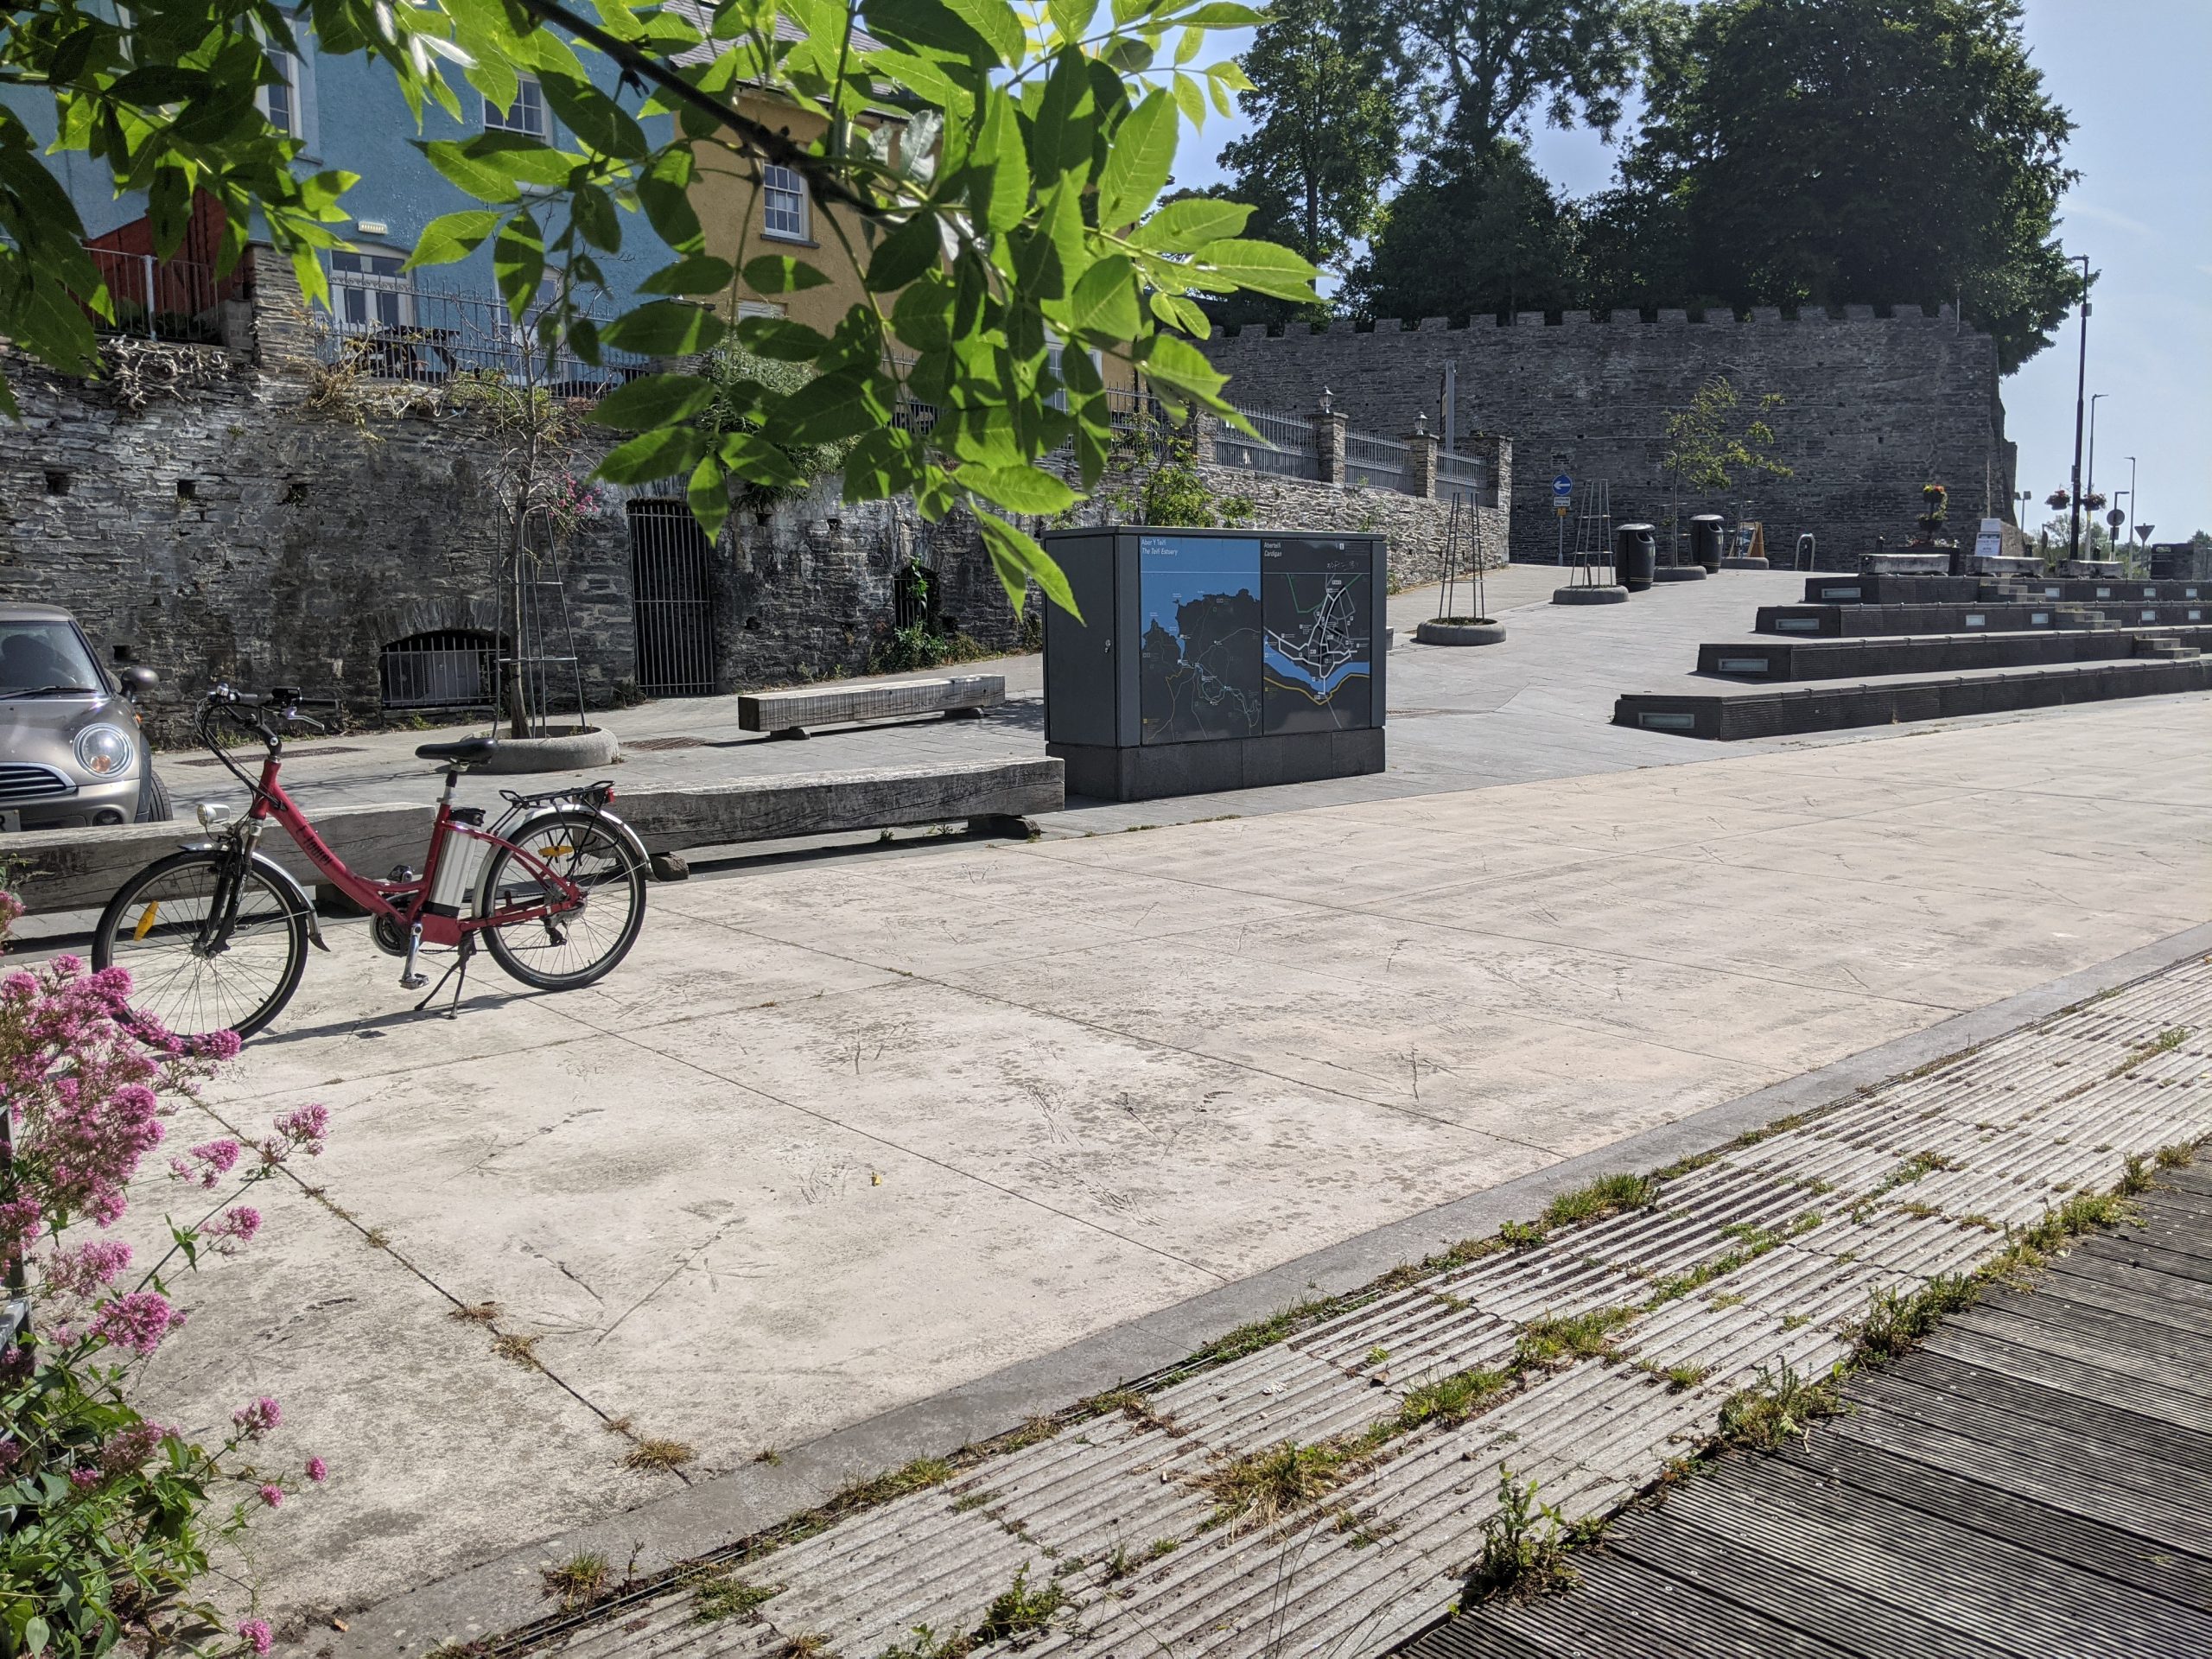 Hard surfacing, tree branches, a bike and stone seating, with a stone wall in the background.